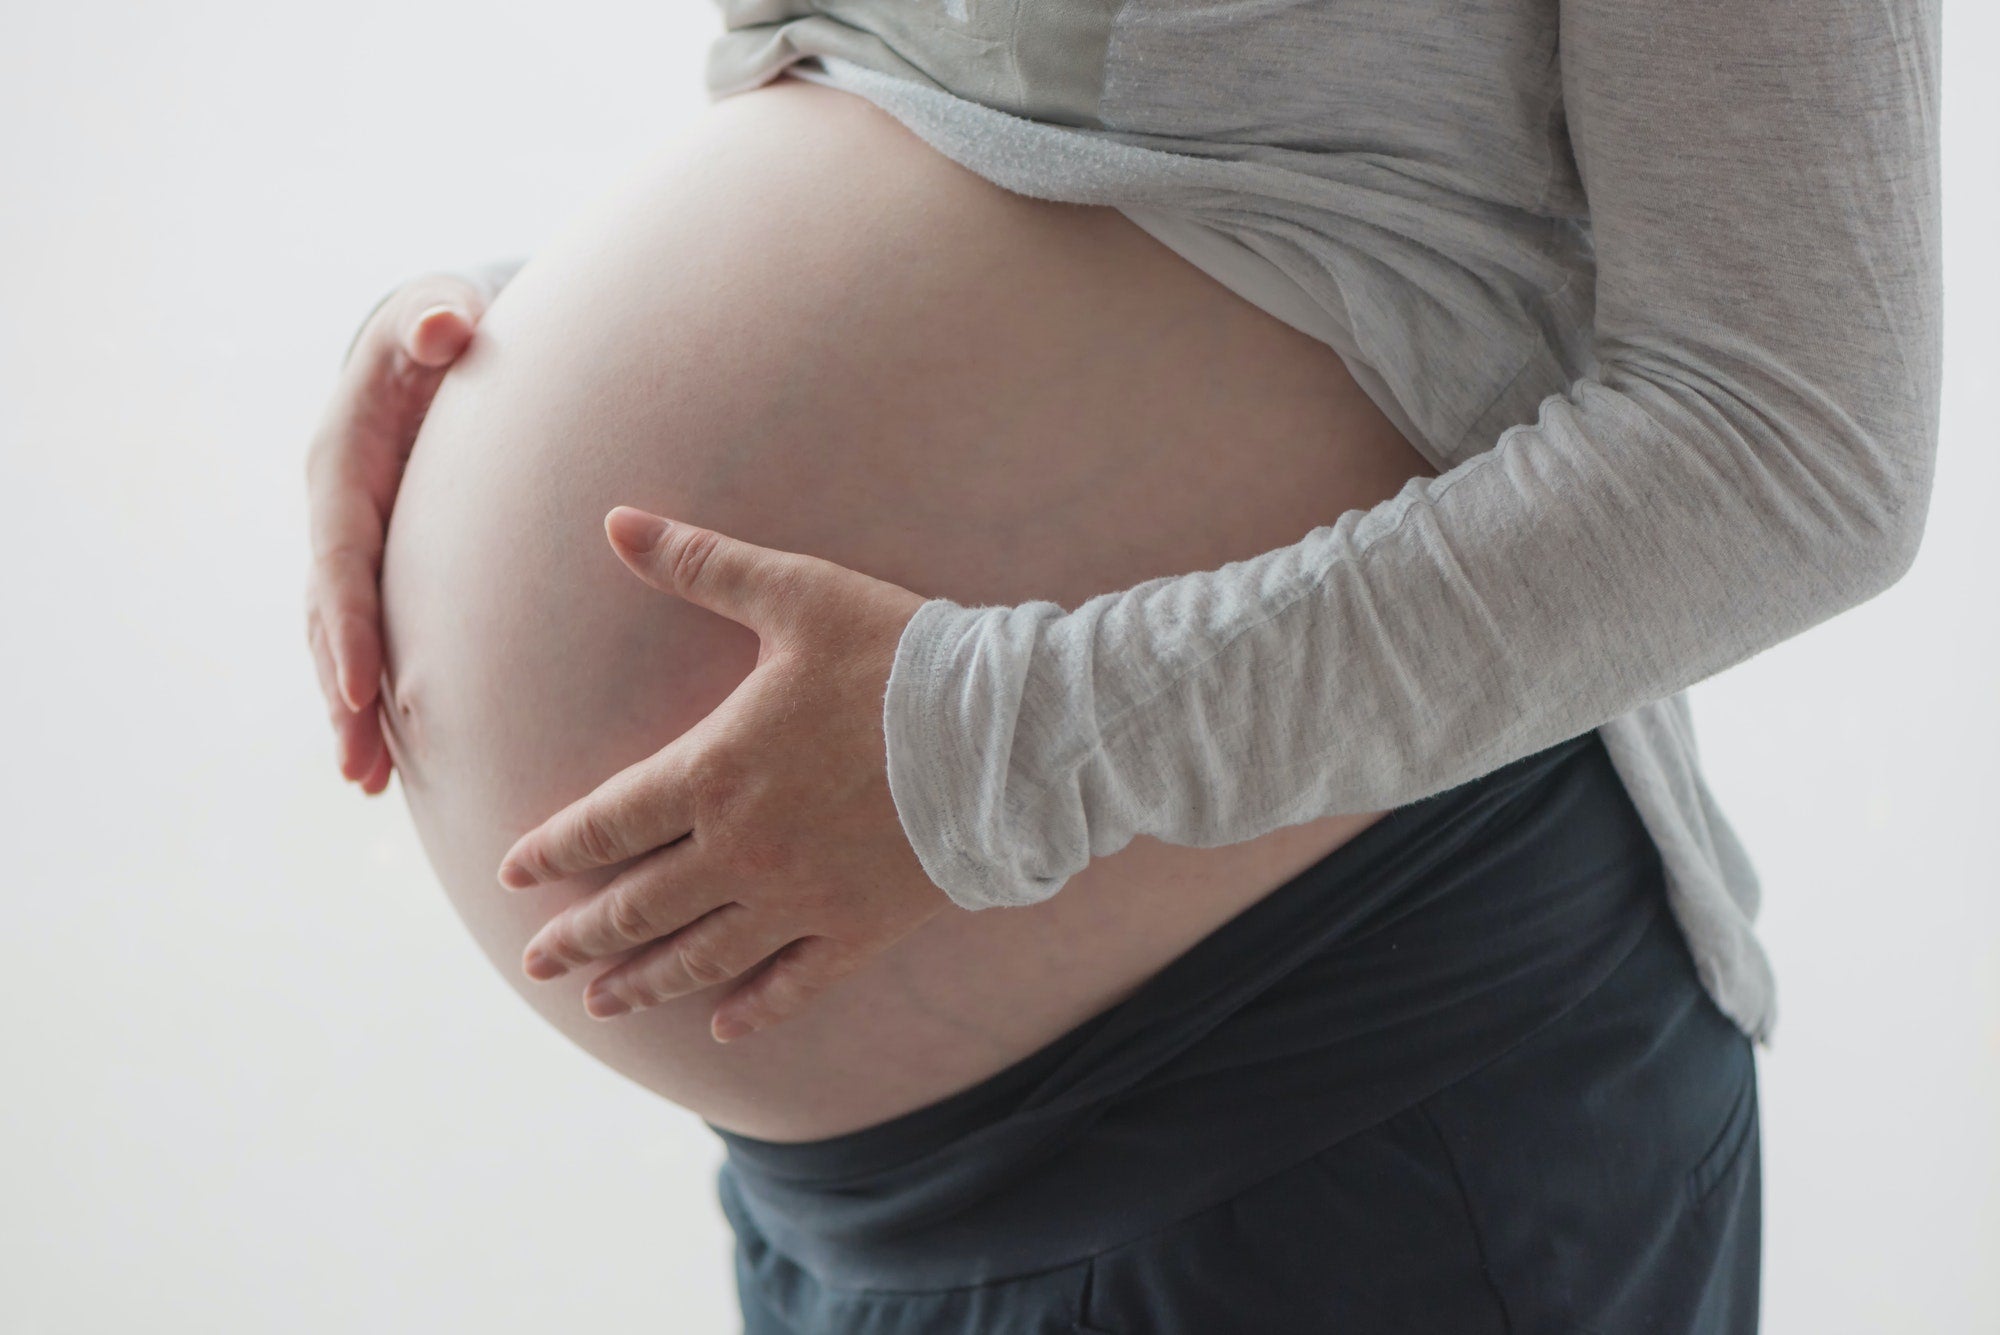 What happens when you are 39 weeks pregnant?